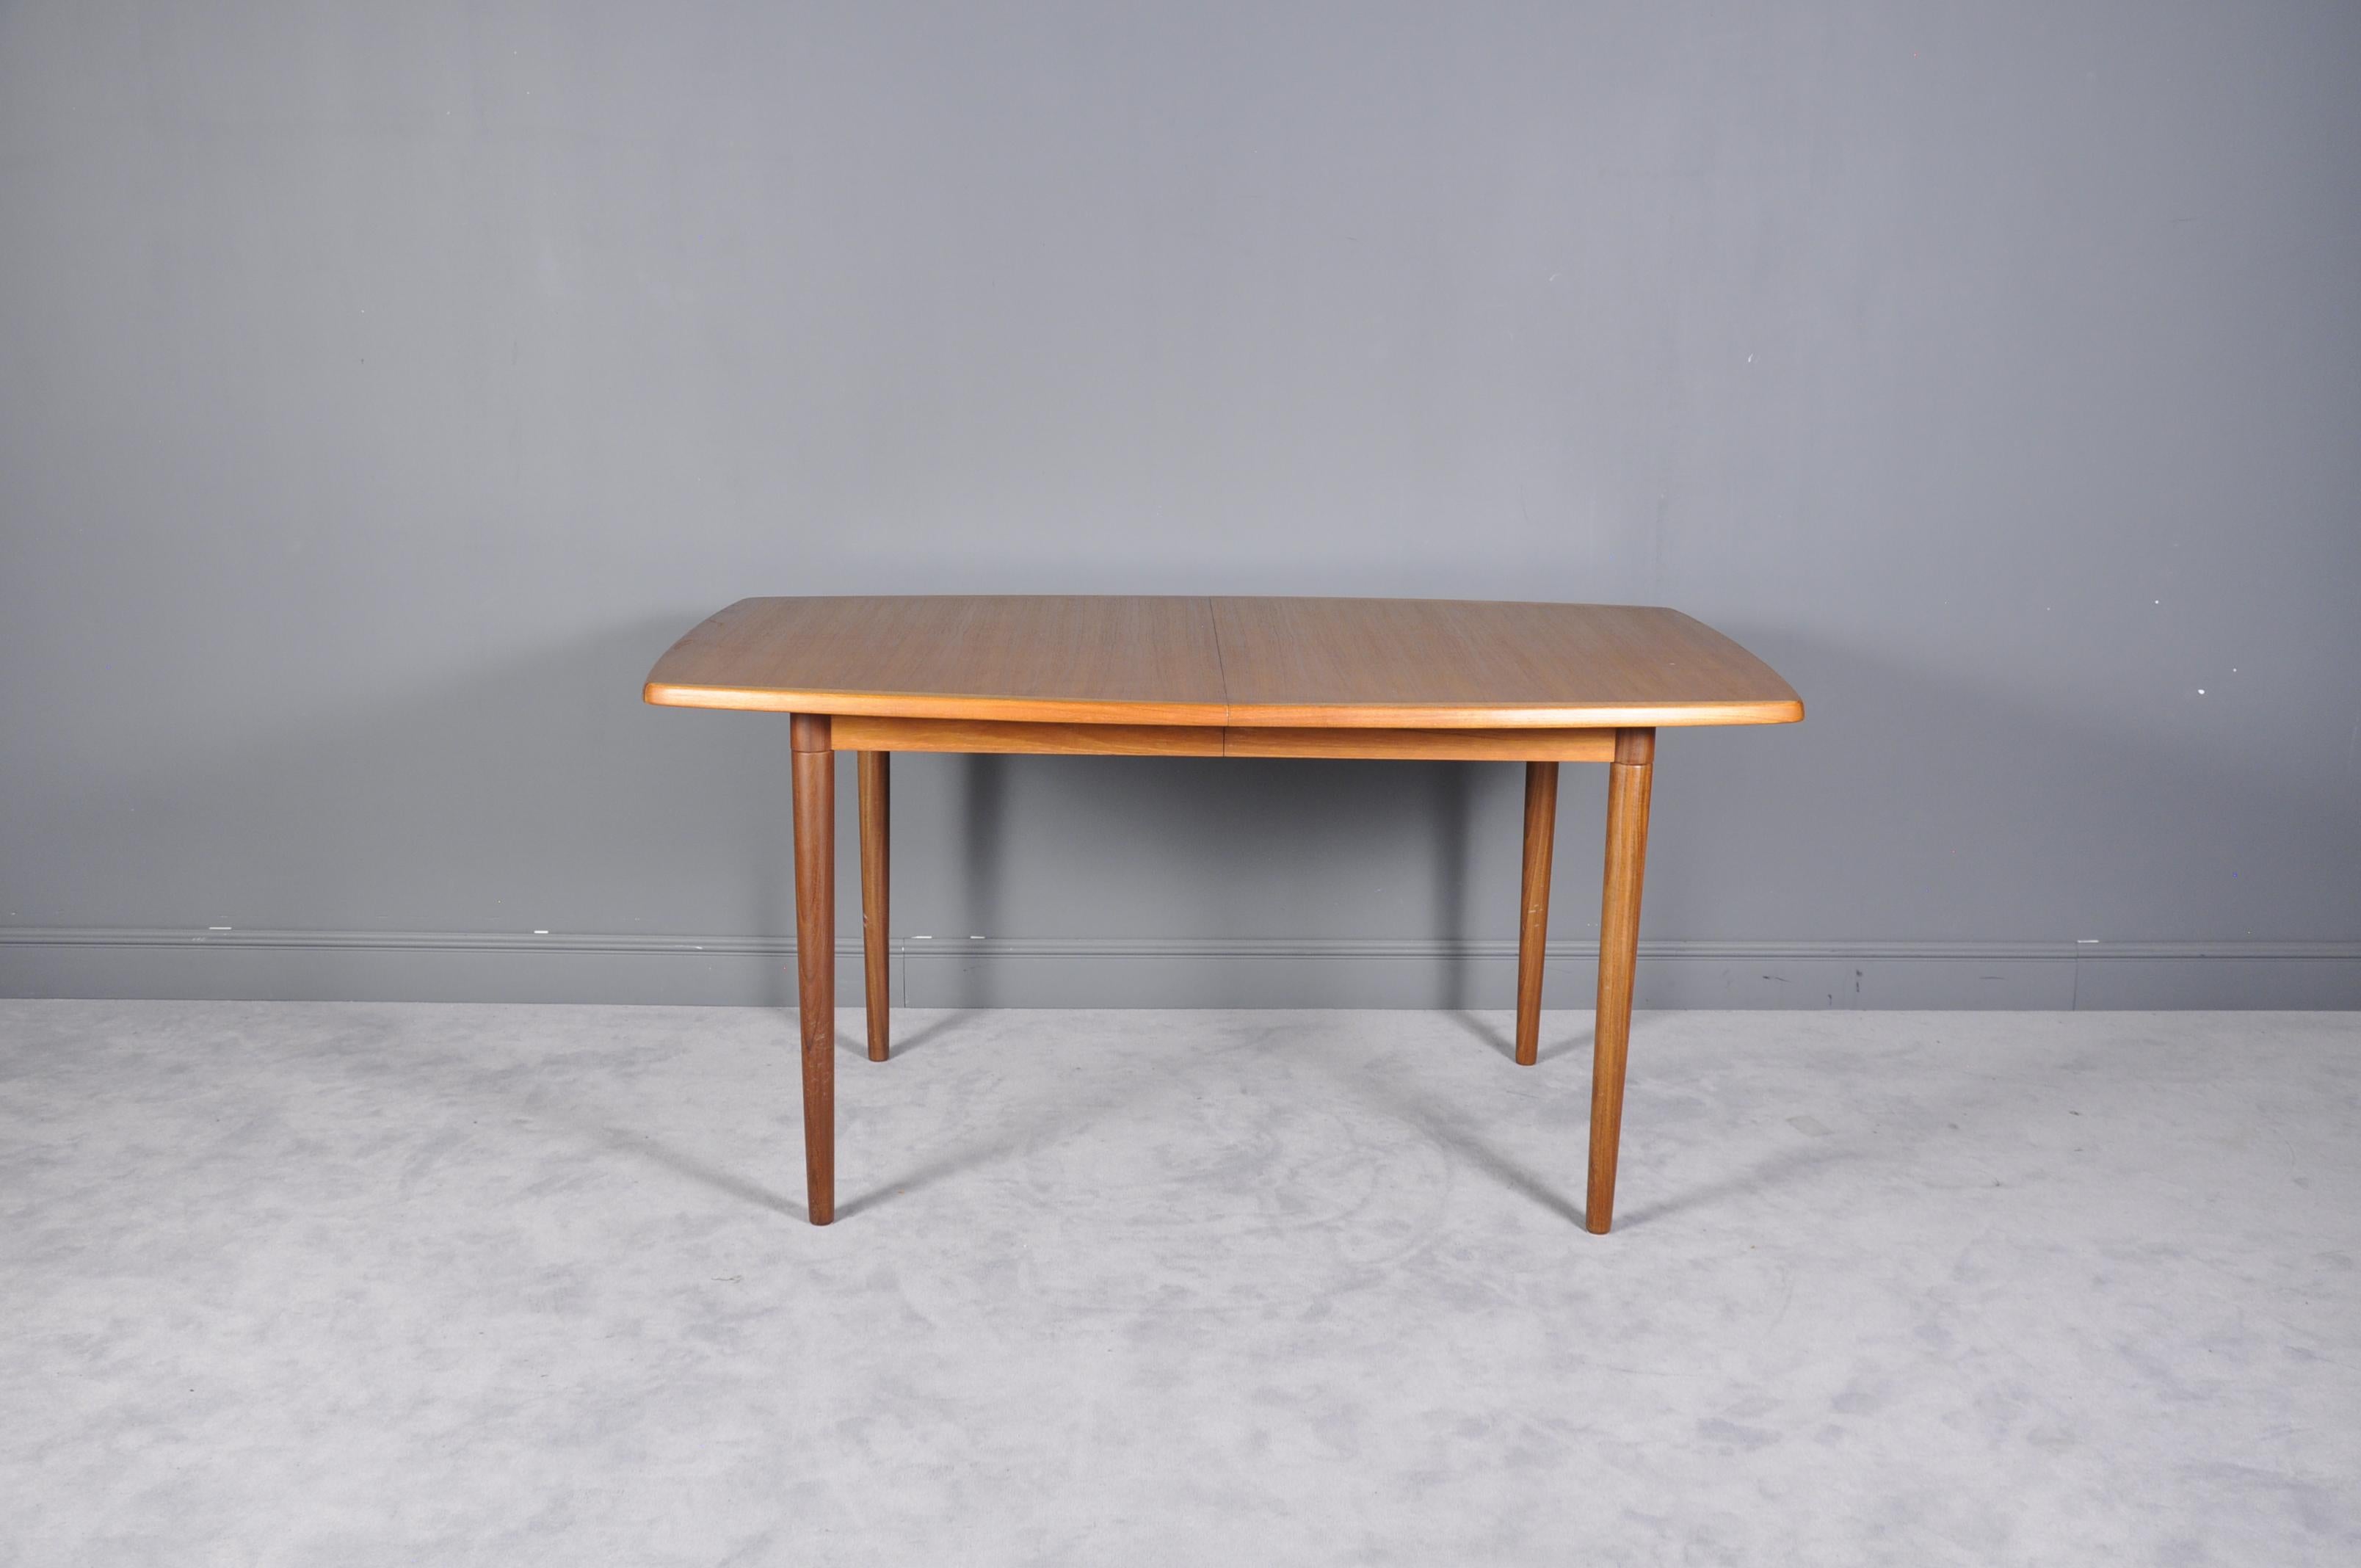 Scandinavian Modern teak wood dining table by Gustav Bahus, Norway. This expandable dining table by Gustav Bahus features beautiful teak wood grain curved rectangular top, unique joinery, tapered legs, and extends with two leaves. With both leaves